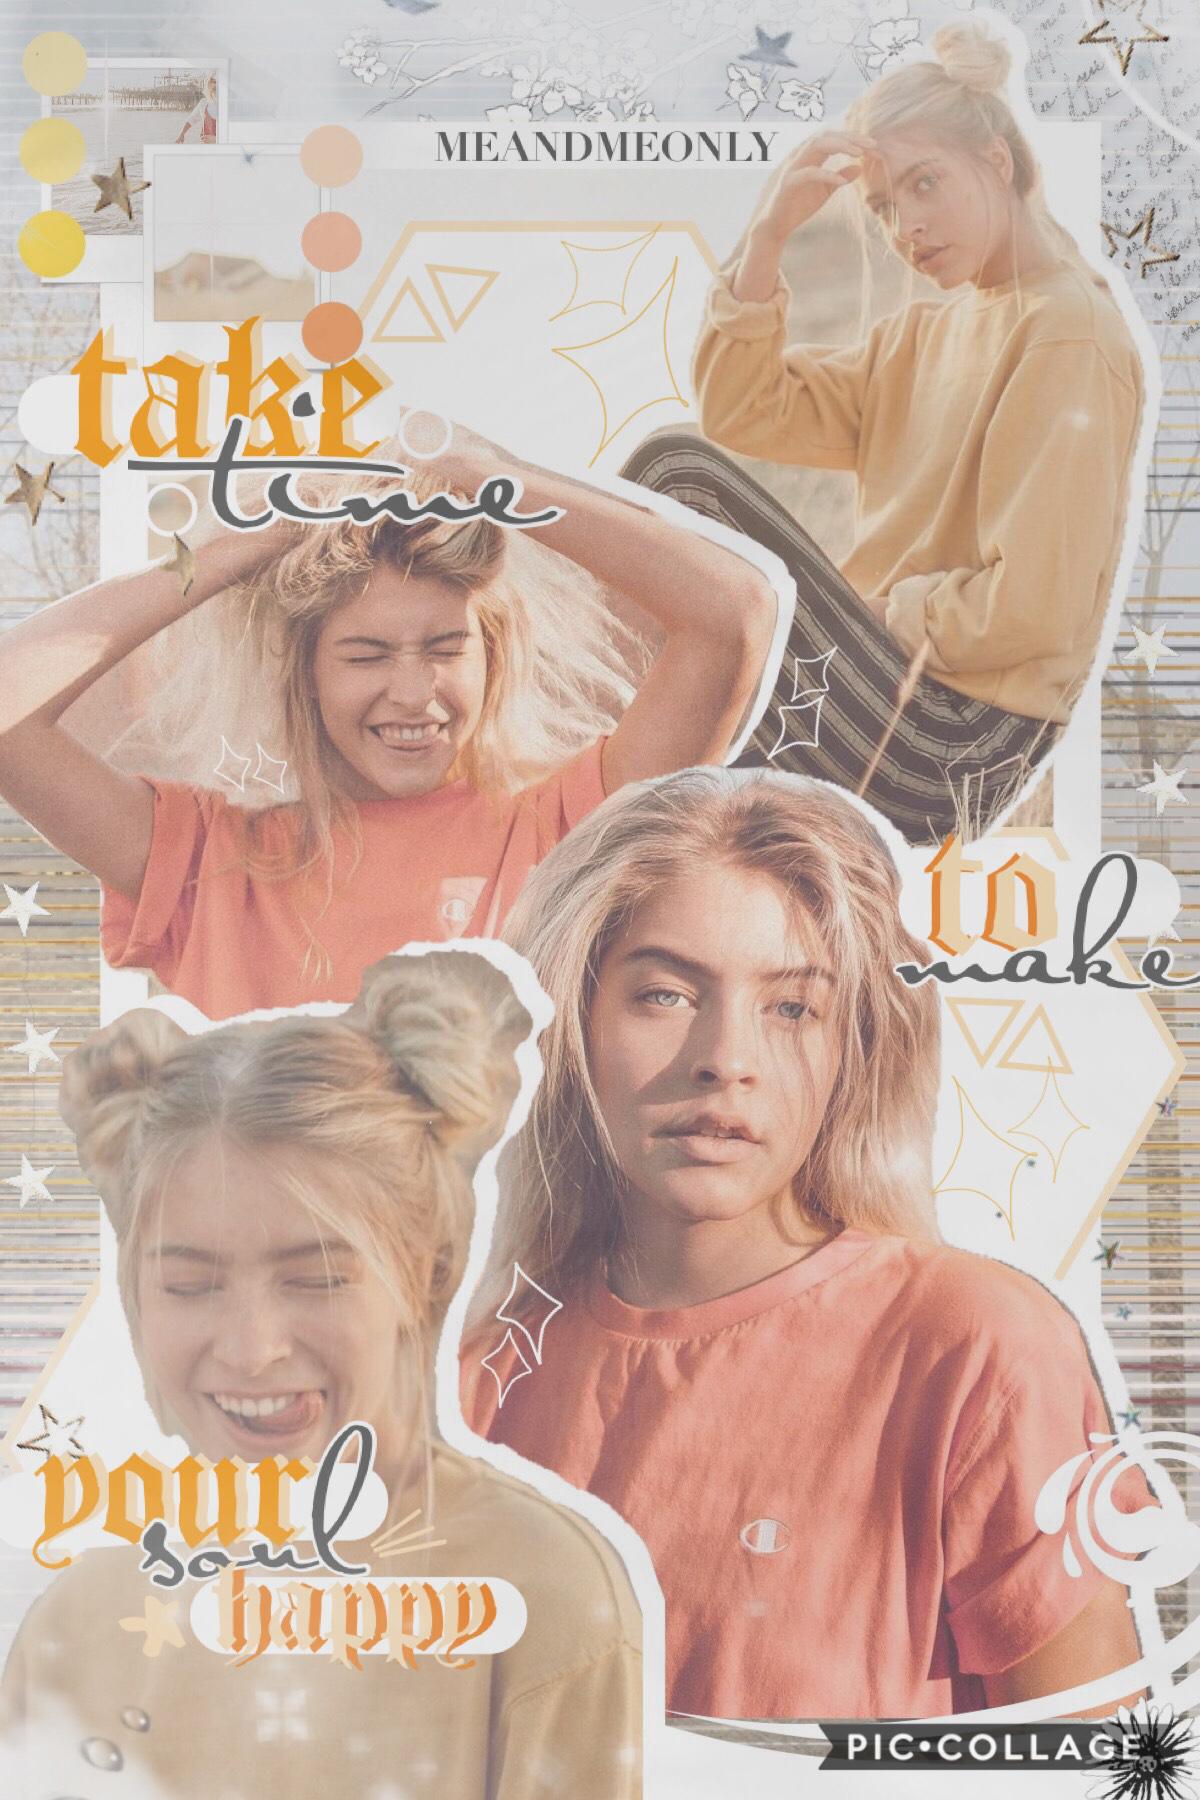 hi👋 im going to be super busy with school so sorry in advance for the inactivity💗☺️making collages take so much time (but I enjoy it) but it means I won’t be able to post much💛✨🍊 hope y’all understand. #SPREADLOVE😍